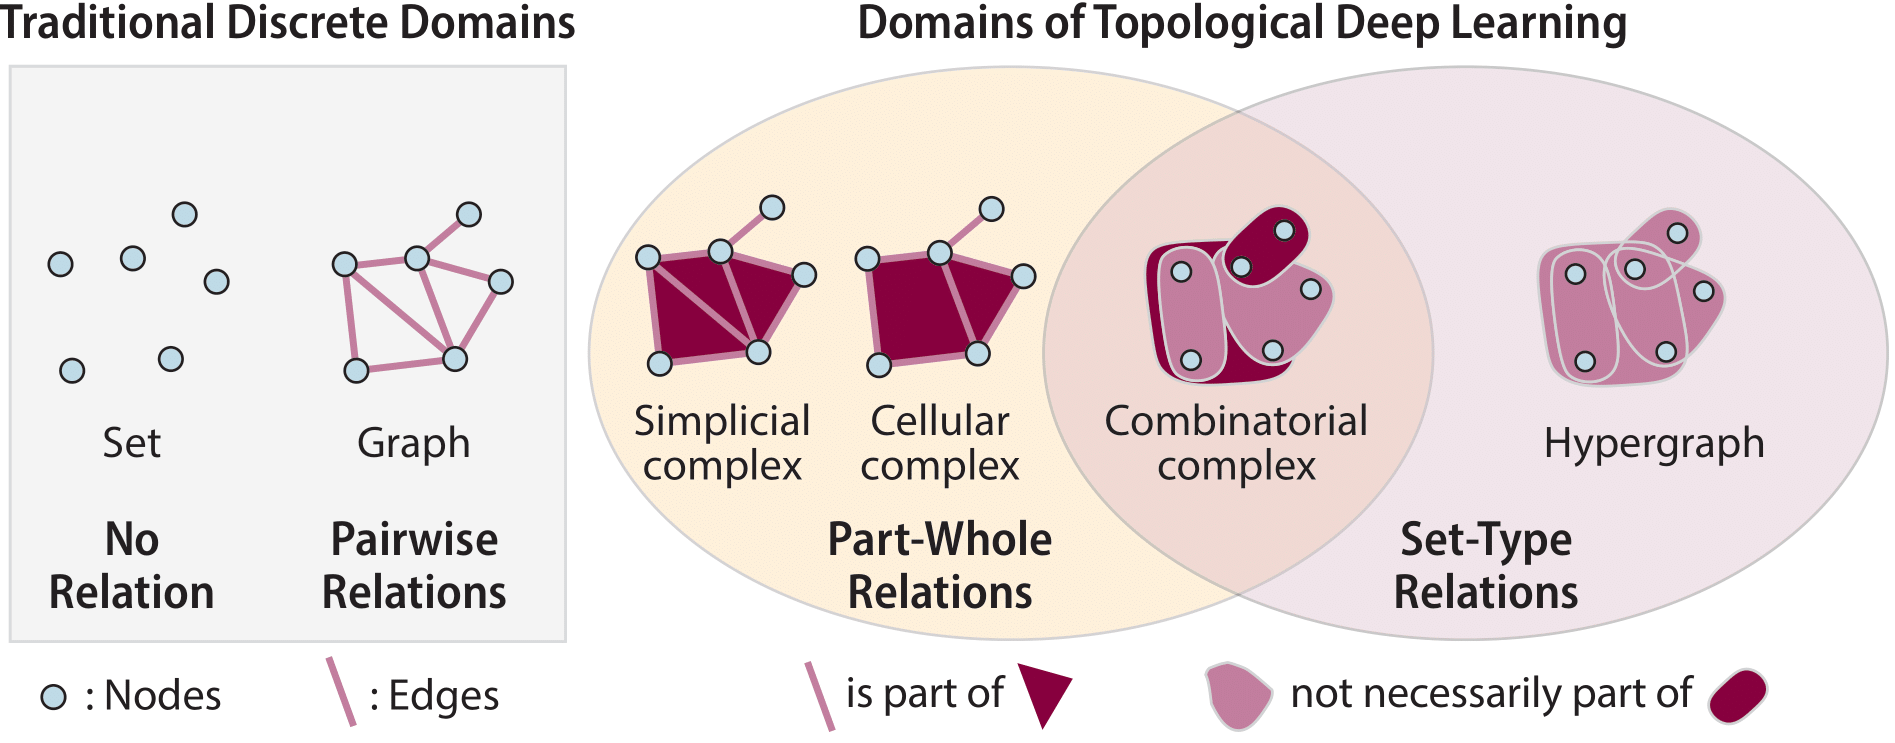 ../_images/domain_categories_with_relations.png